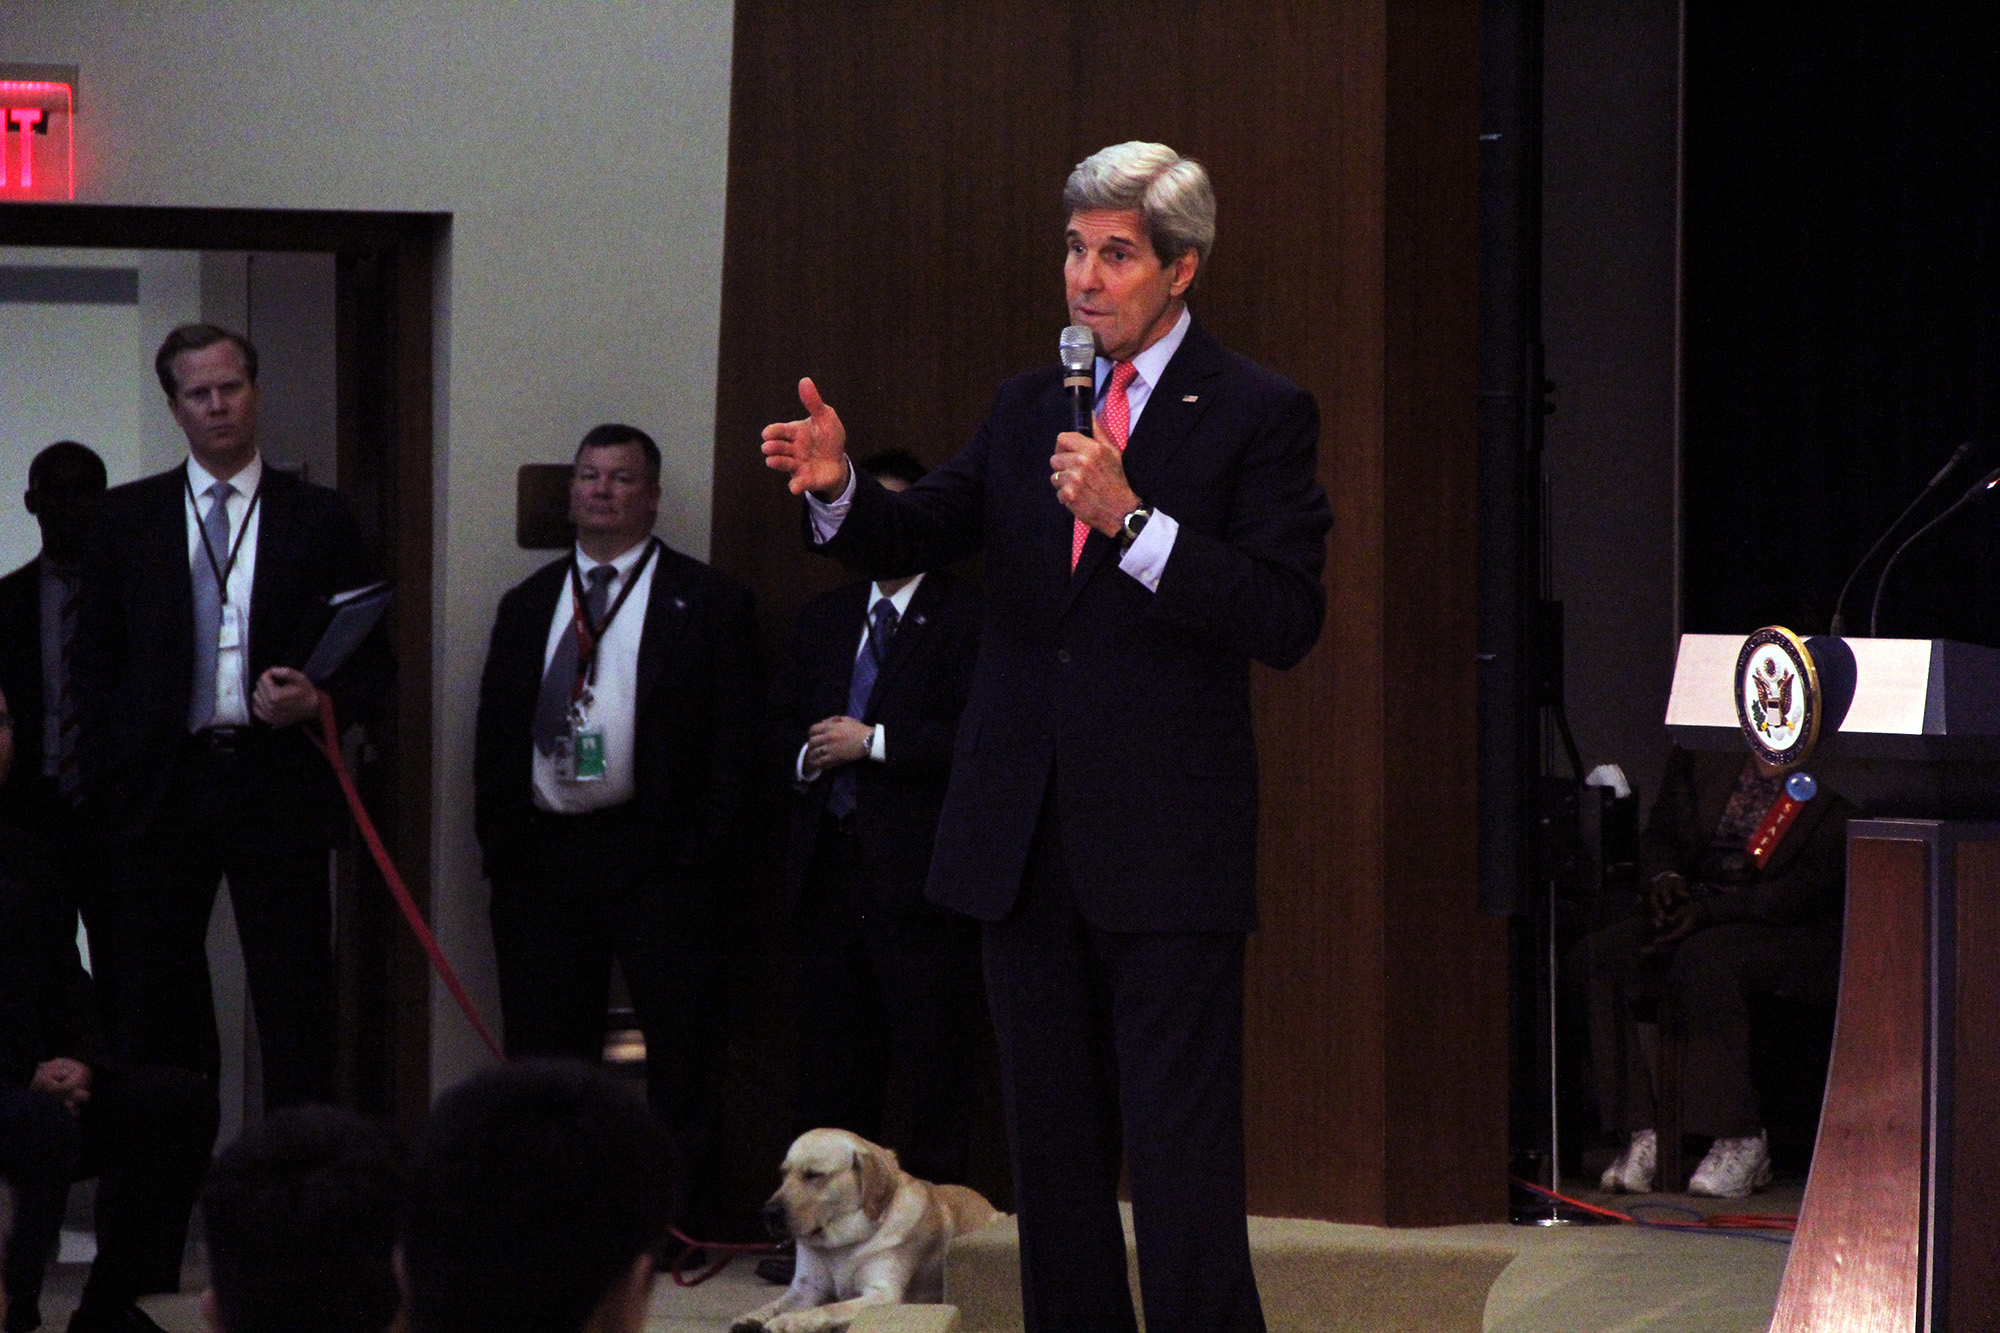 John Kerry brings pet dog to Take Your Child to Work event at State Department